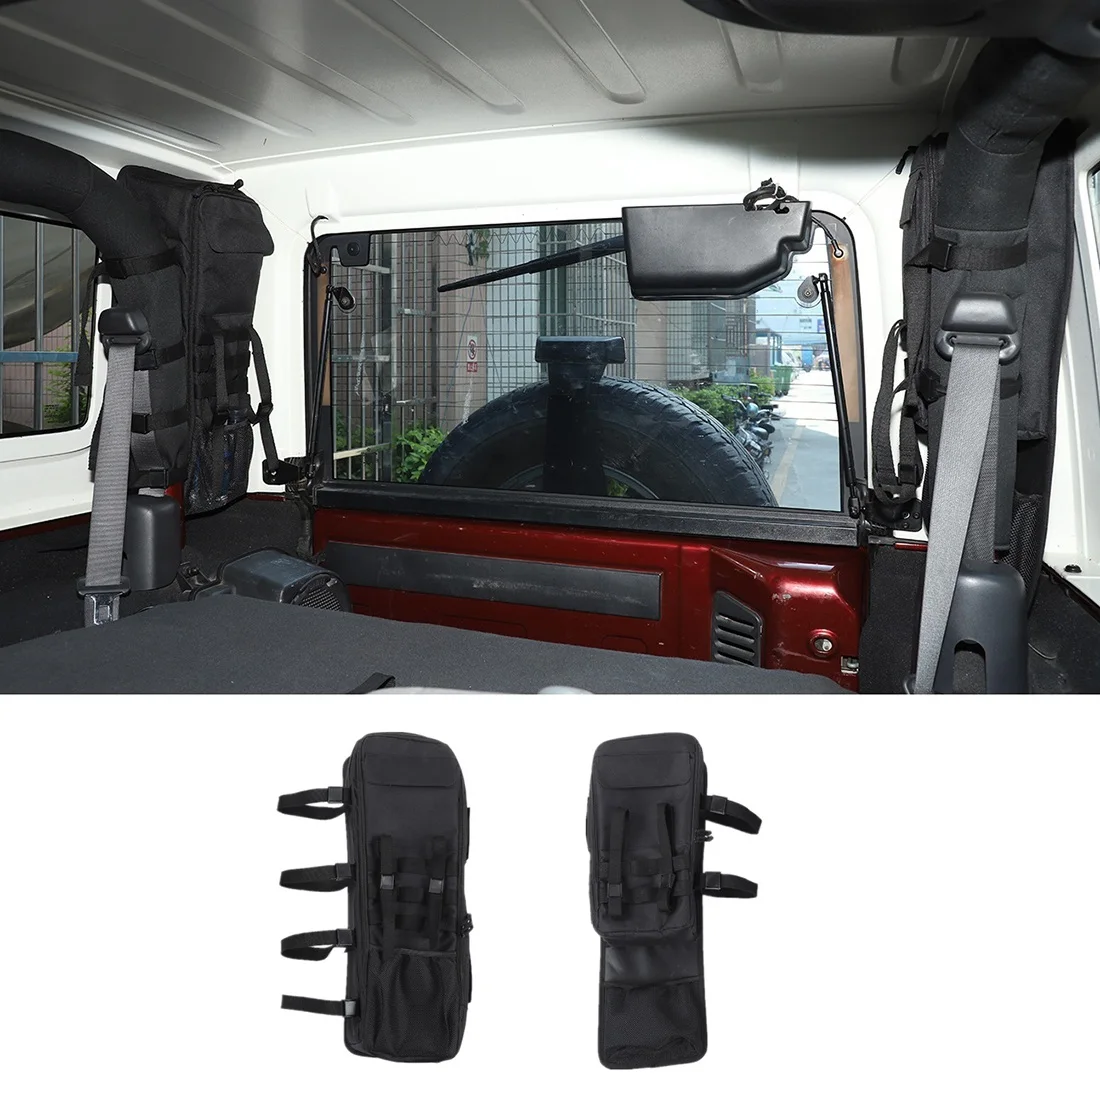 

Roll Bar Storage Bag Cargo Cage with Multi-Pockets Trunk Organizers for Jeep Wrangler JK 2007-2017 2 Doors Accessories